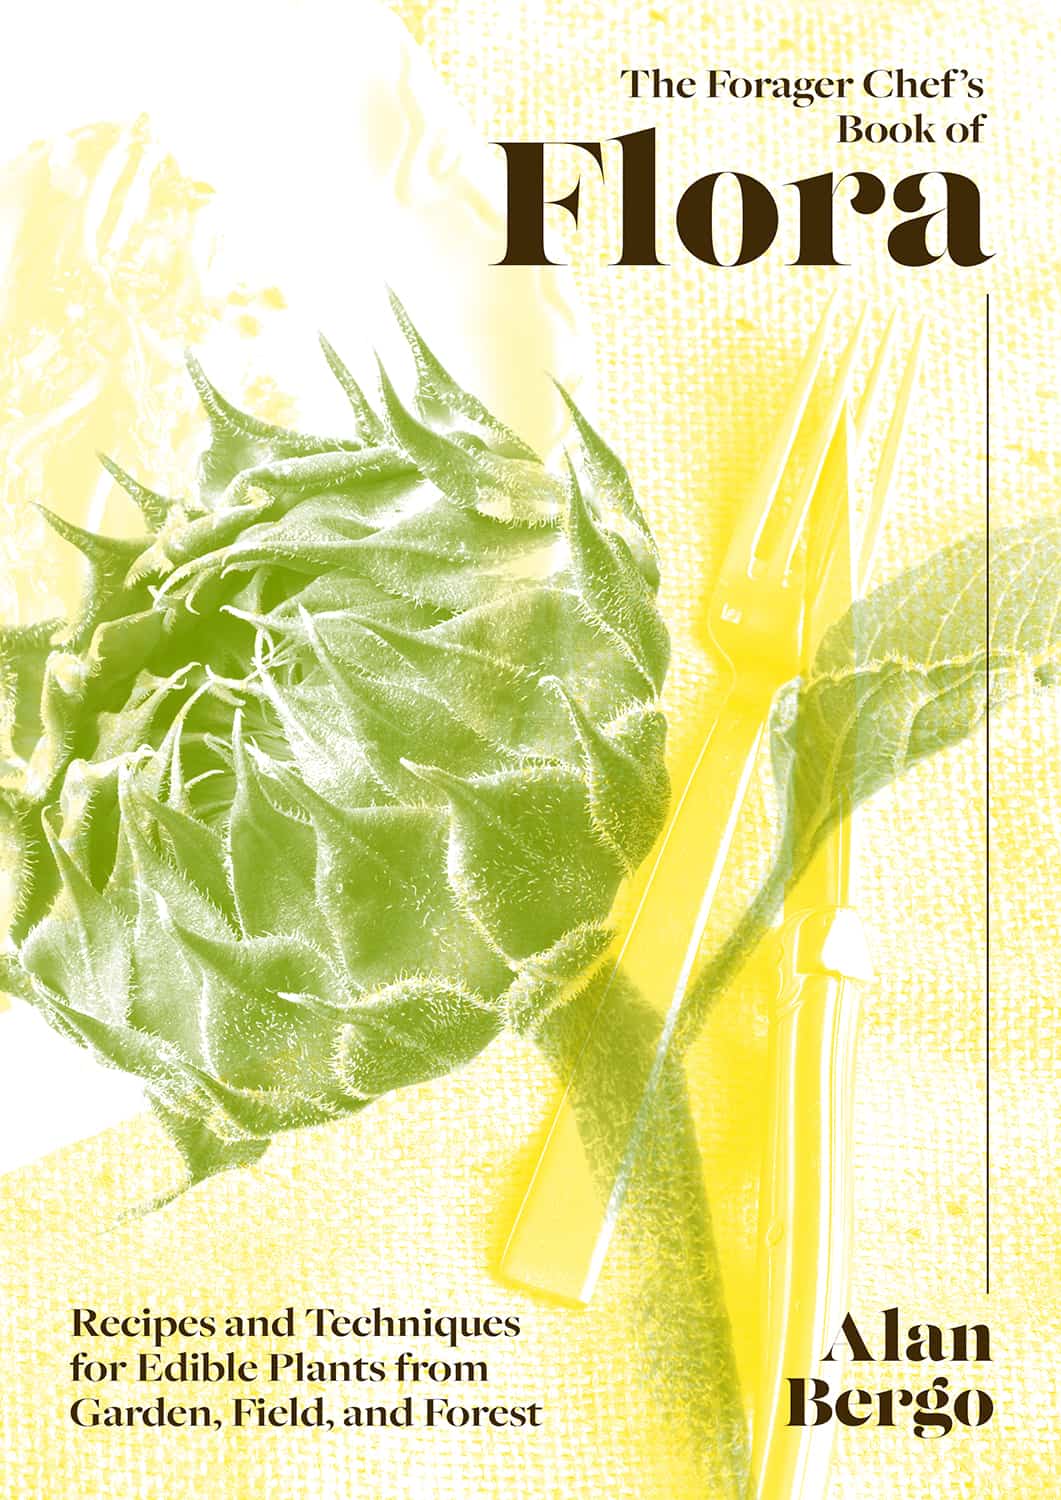 the forager chefs book of flora by Chef Alan Bergo